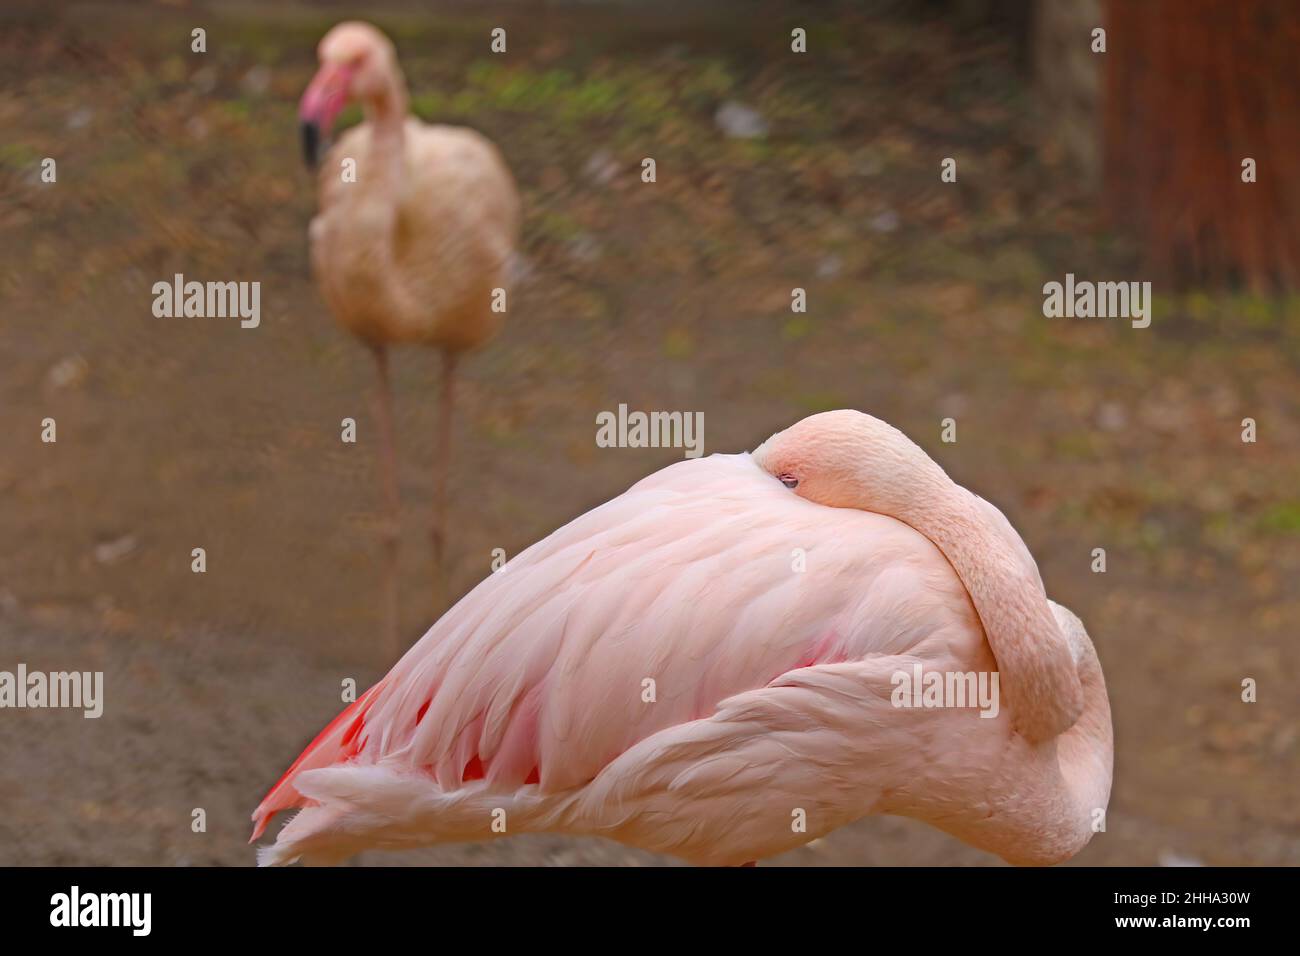 A pink flamingo stands on one leg with its head buried in feathers Stock Photo